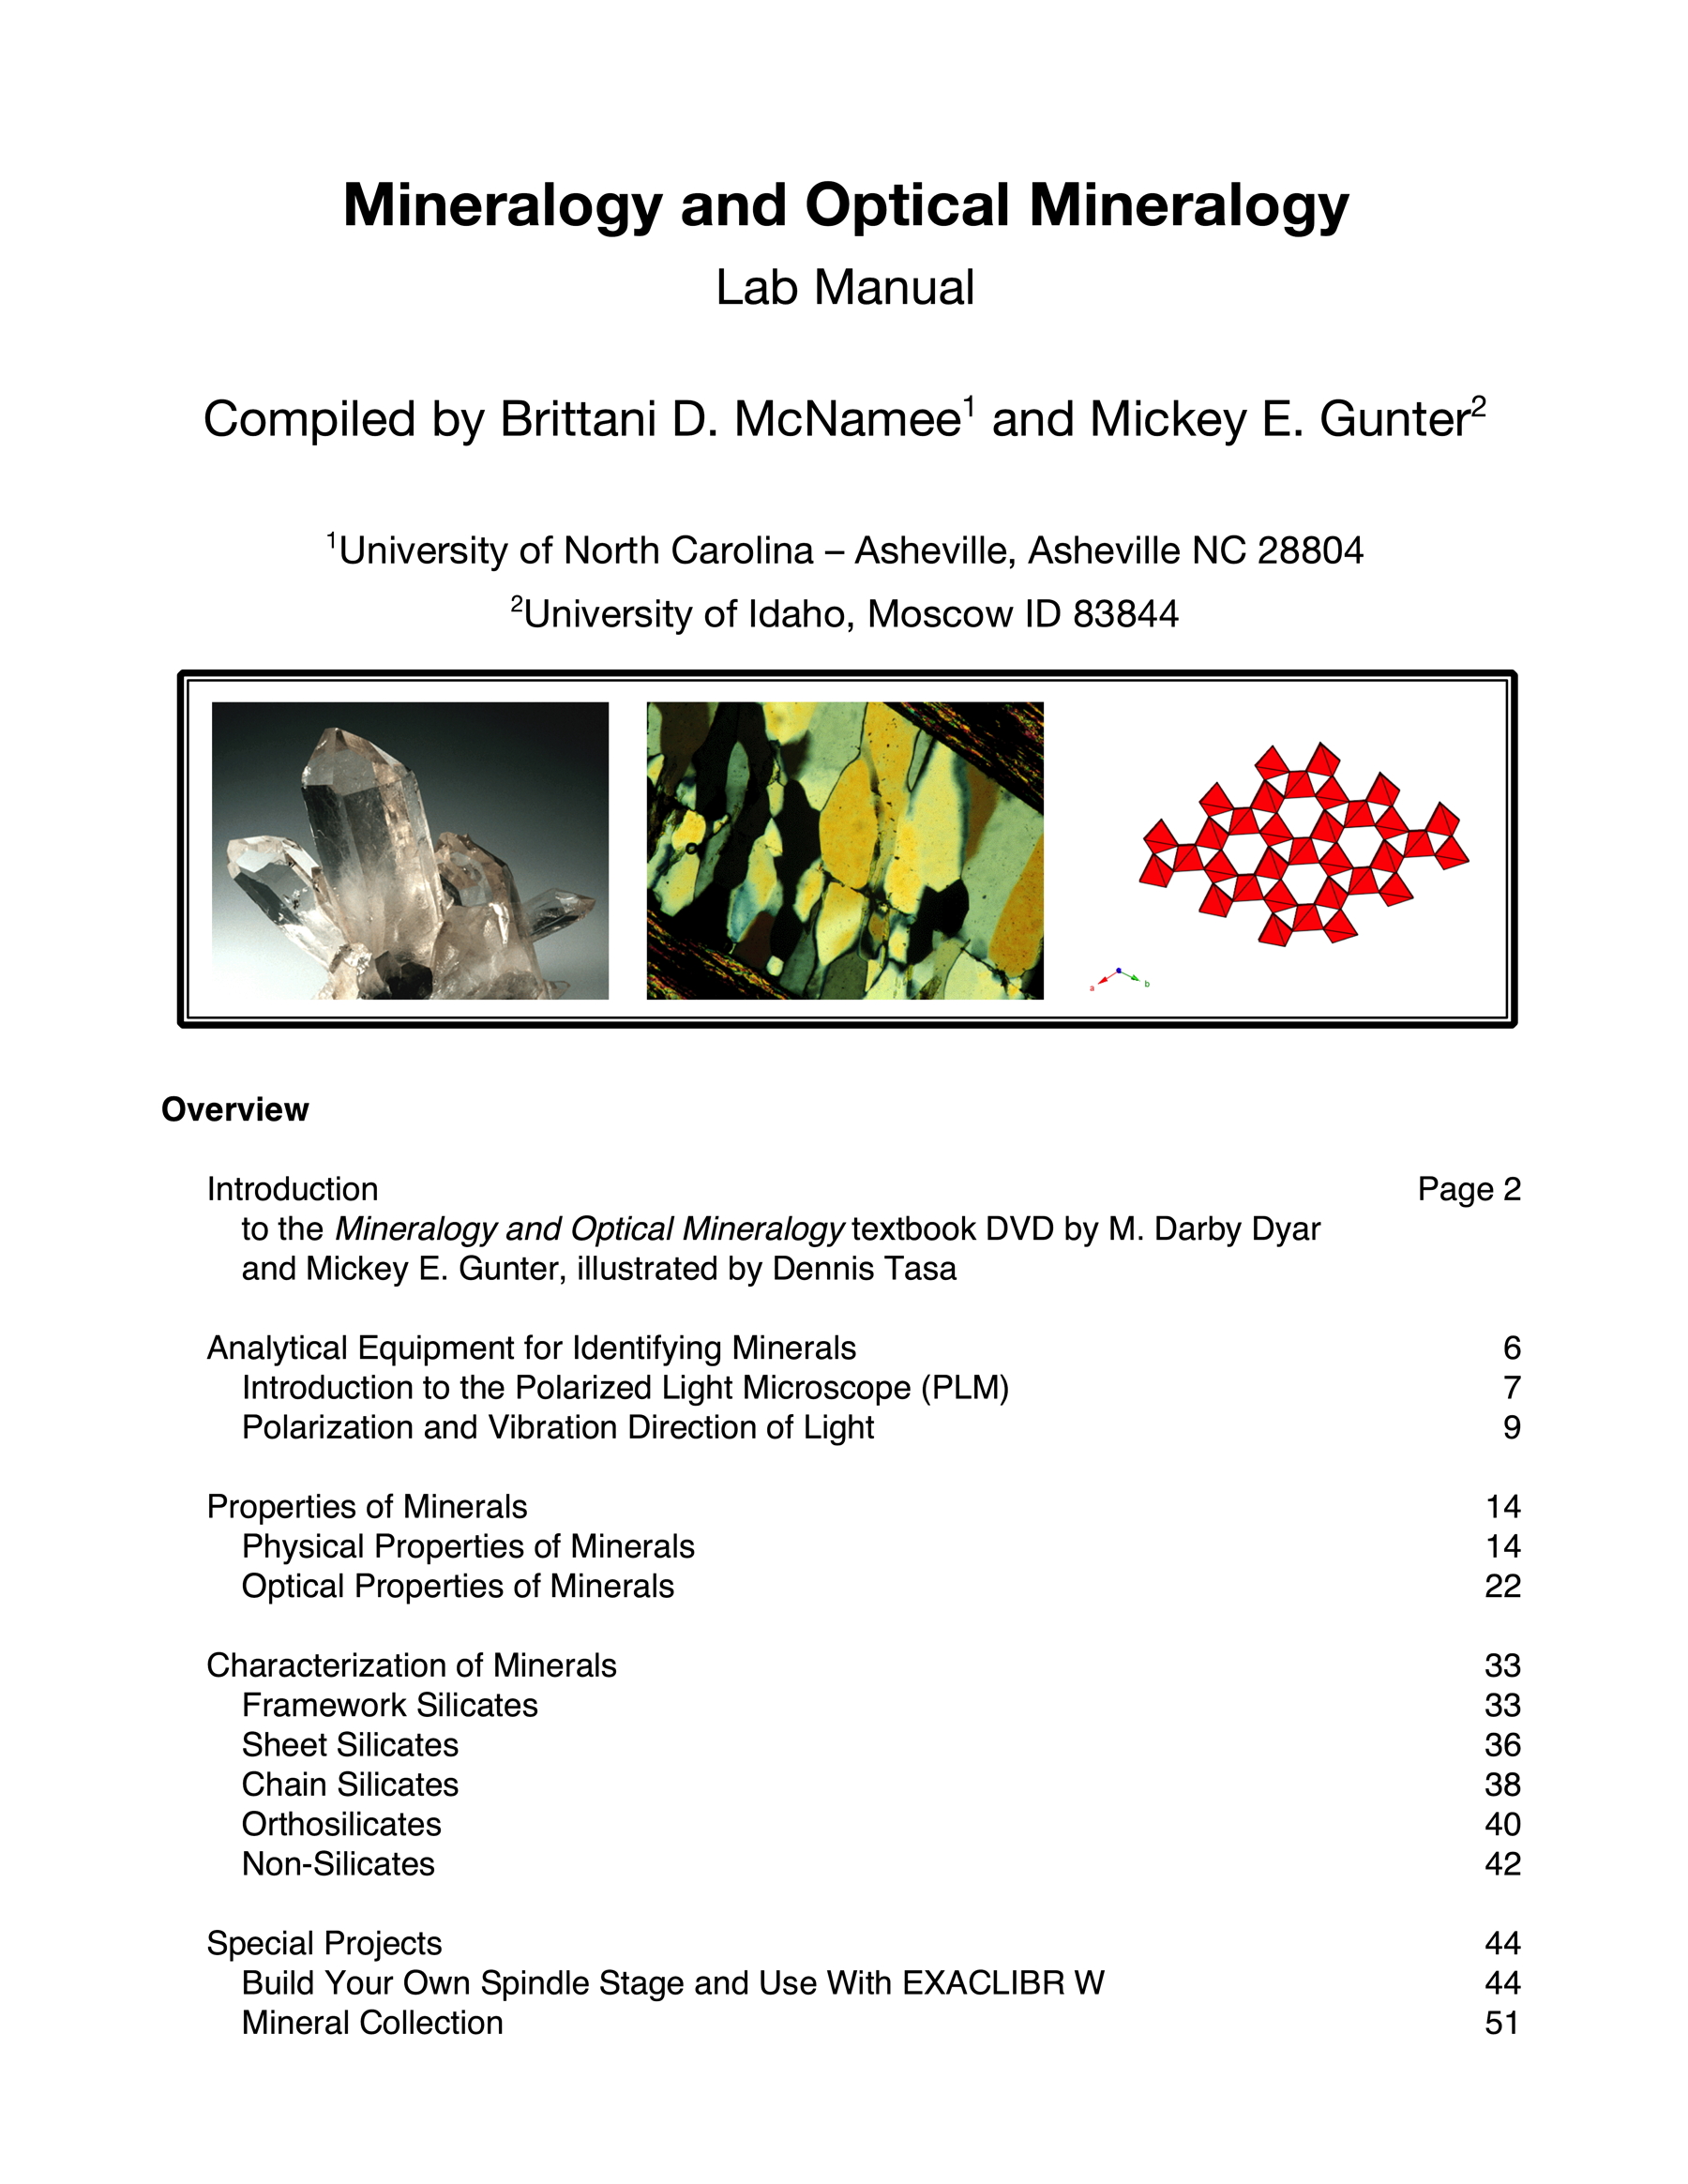 Cover of Guide to Mineralogy and Optical Mineralogy Laboratory Manual